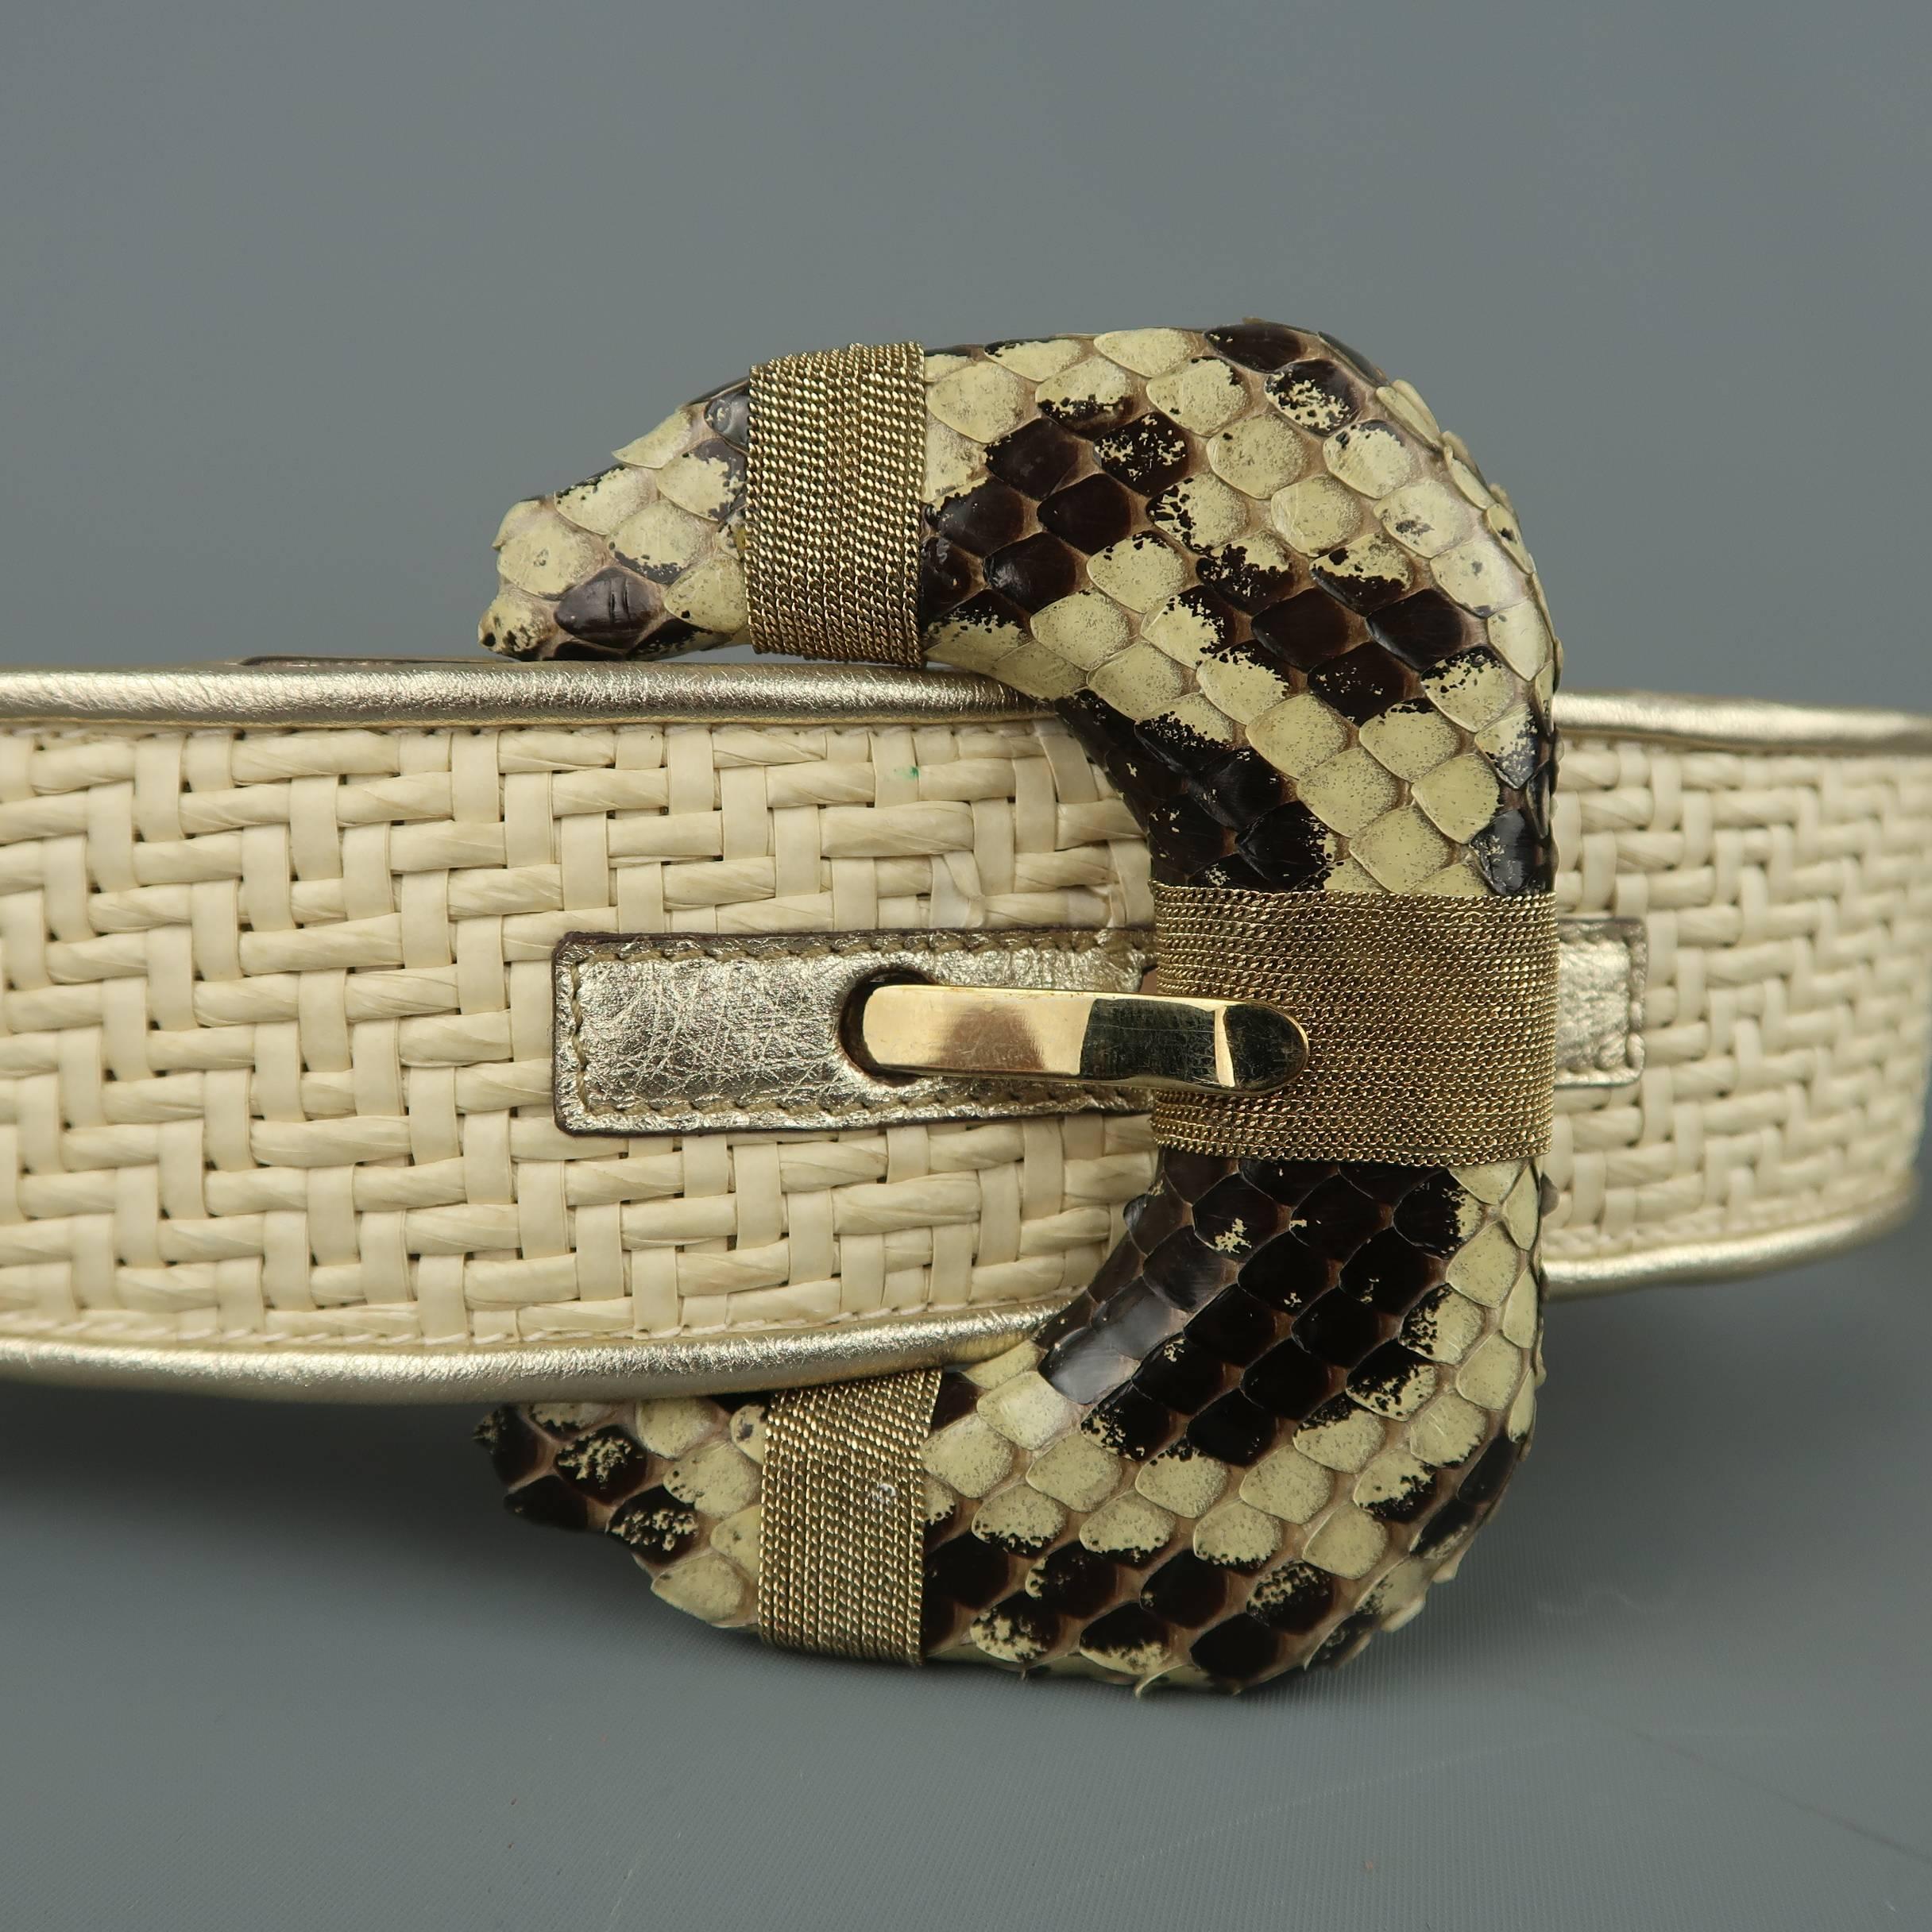 OSCAR DE LA RENTA belt features a cream woven raffia covered leather strap with metallic champagne gold leather piping and oversized snakeskin leather buckle with chain accents. Made in Italy.
 
Good Pre-Owned Condition.
Marked: M
 
Length: 37